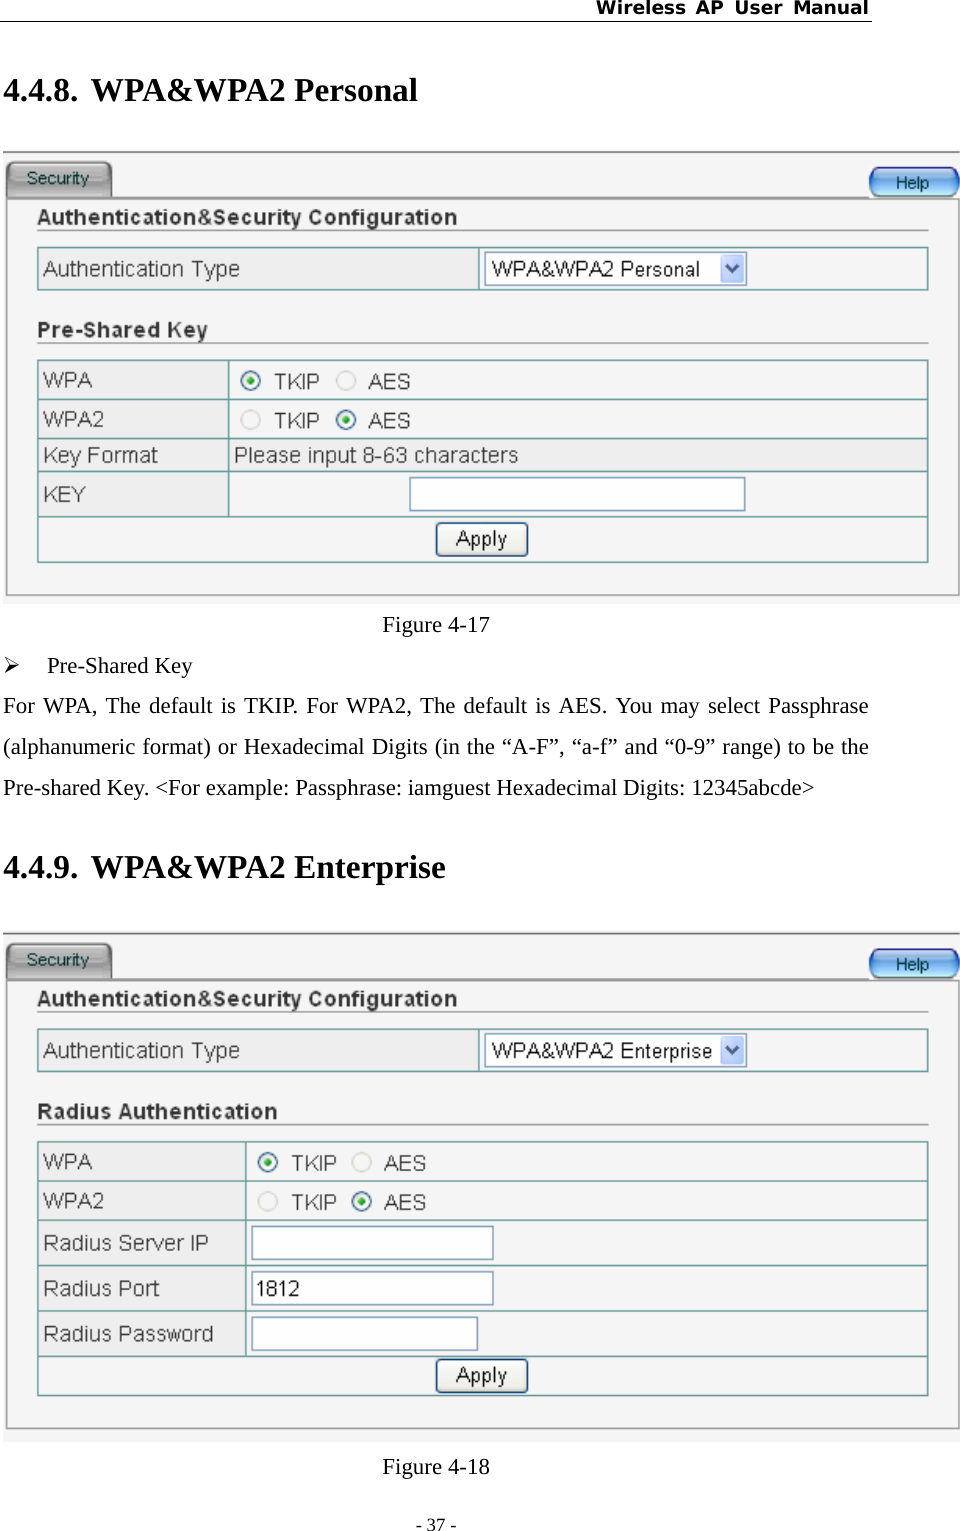 Wireless AP User Manual - 37 -  4.4.8. WPA&amp;WPA2 Personal  Figure 4-17 ¾ Pre-Shared Key For WPA, The default is TKIP. For WPA2, The default is AES. You may select Passphrase (alphanumeric format) or Hexadecimal Digits (in the “A-F”, “a-f” and “0-9” range) to be the Pre-shared Key. &lt;For example: Passphrase: iamguest Hexadecimal Digits: 12345abcde&gt; 4.4.9. WPA&amp;WPA2 Enterprise  Figure 4-18 